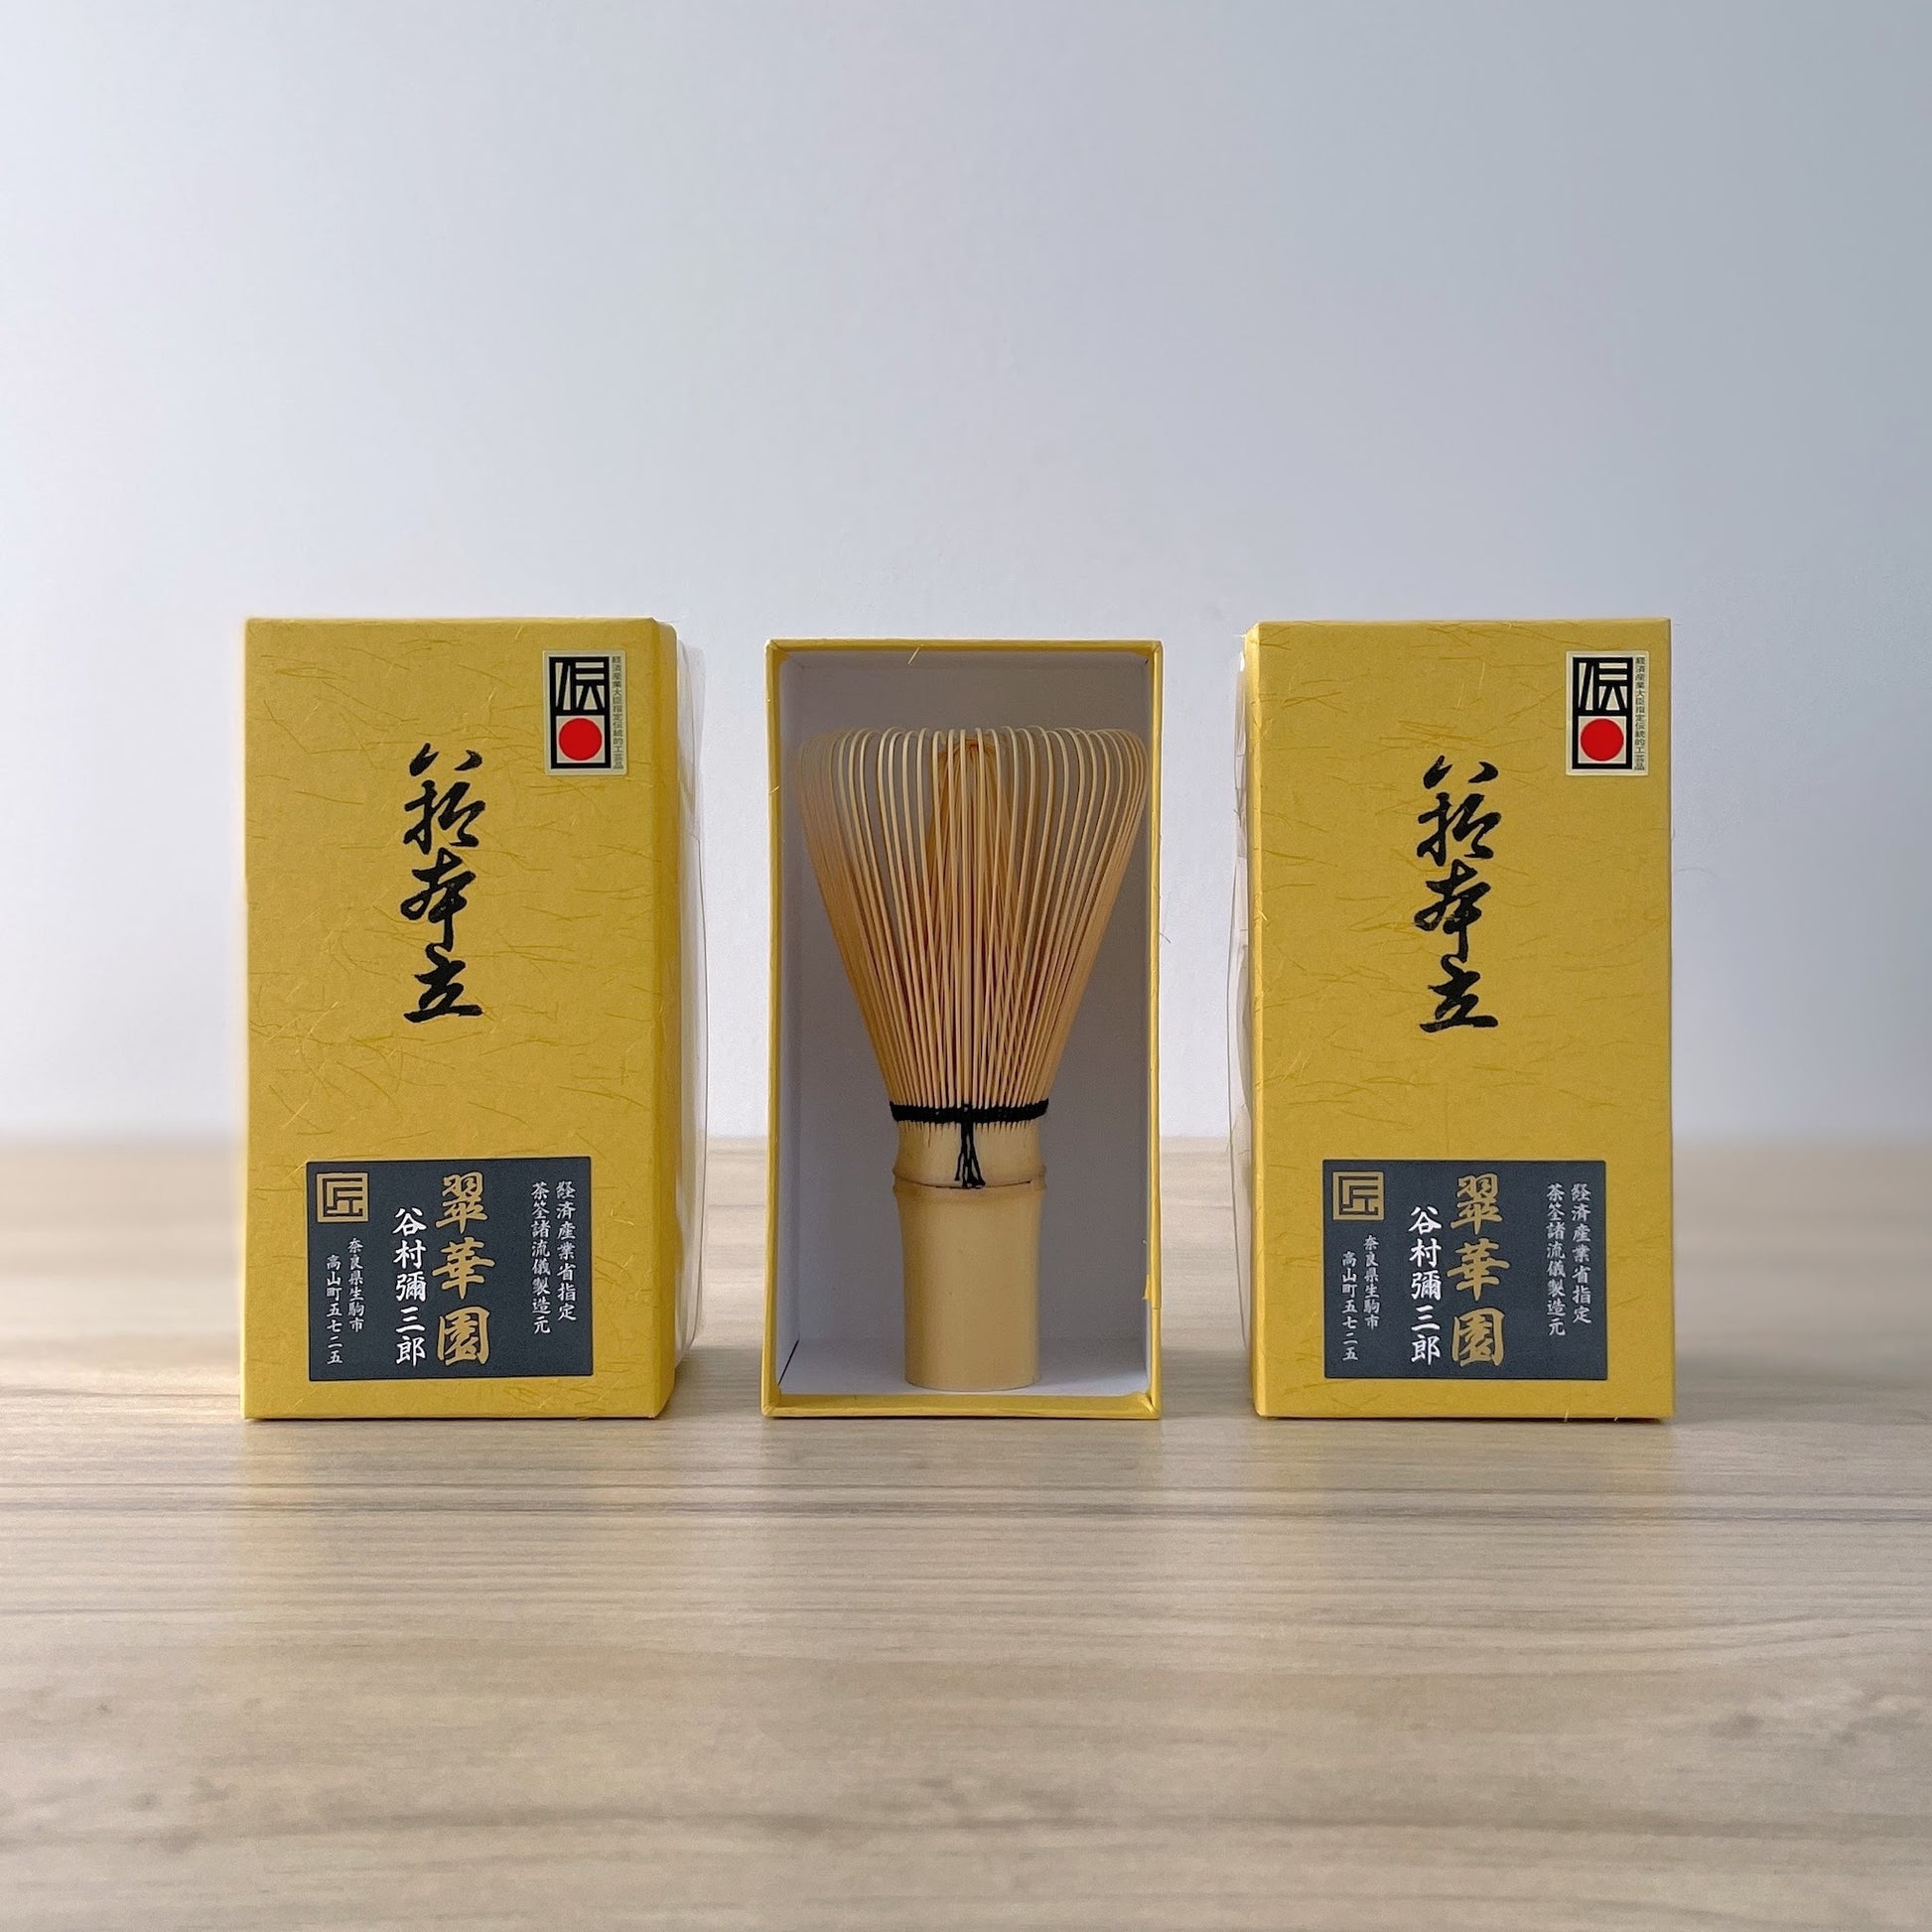 Chasen Matcha Bamboo Whisk 80 Tips - Made in Japan